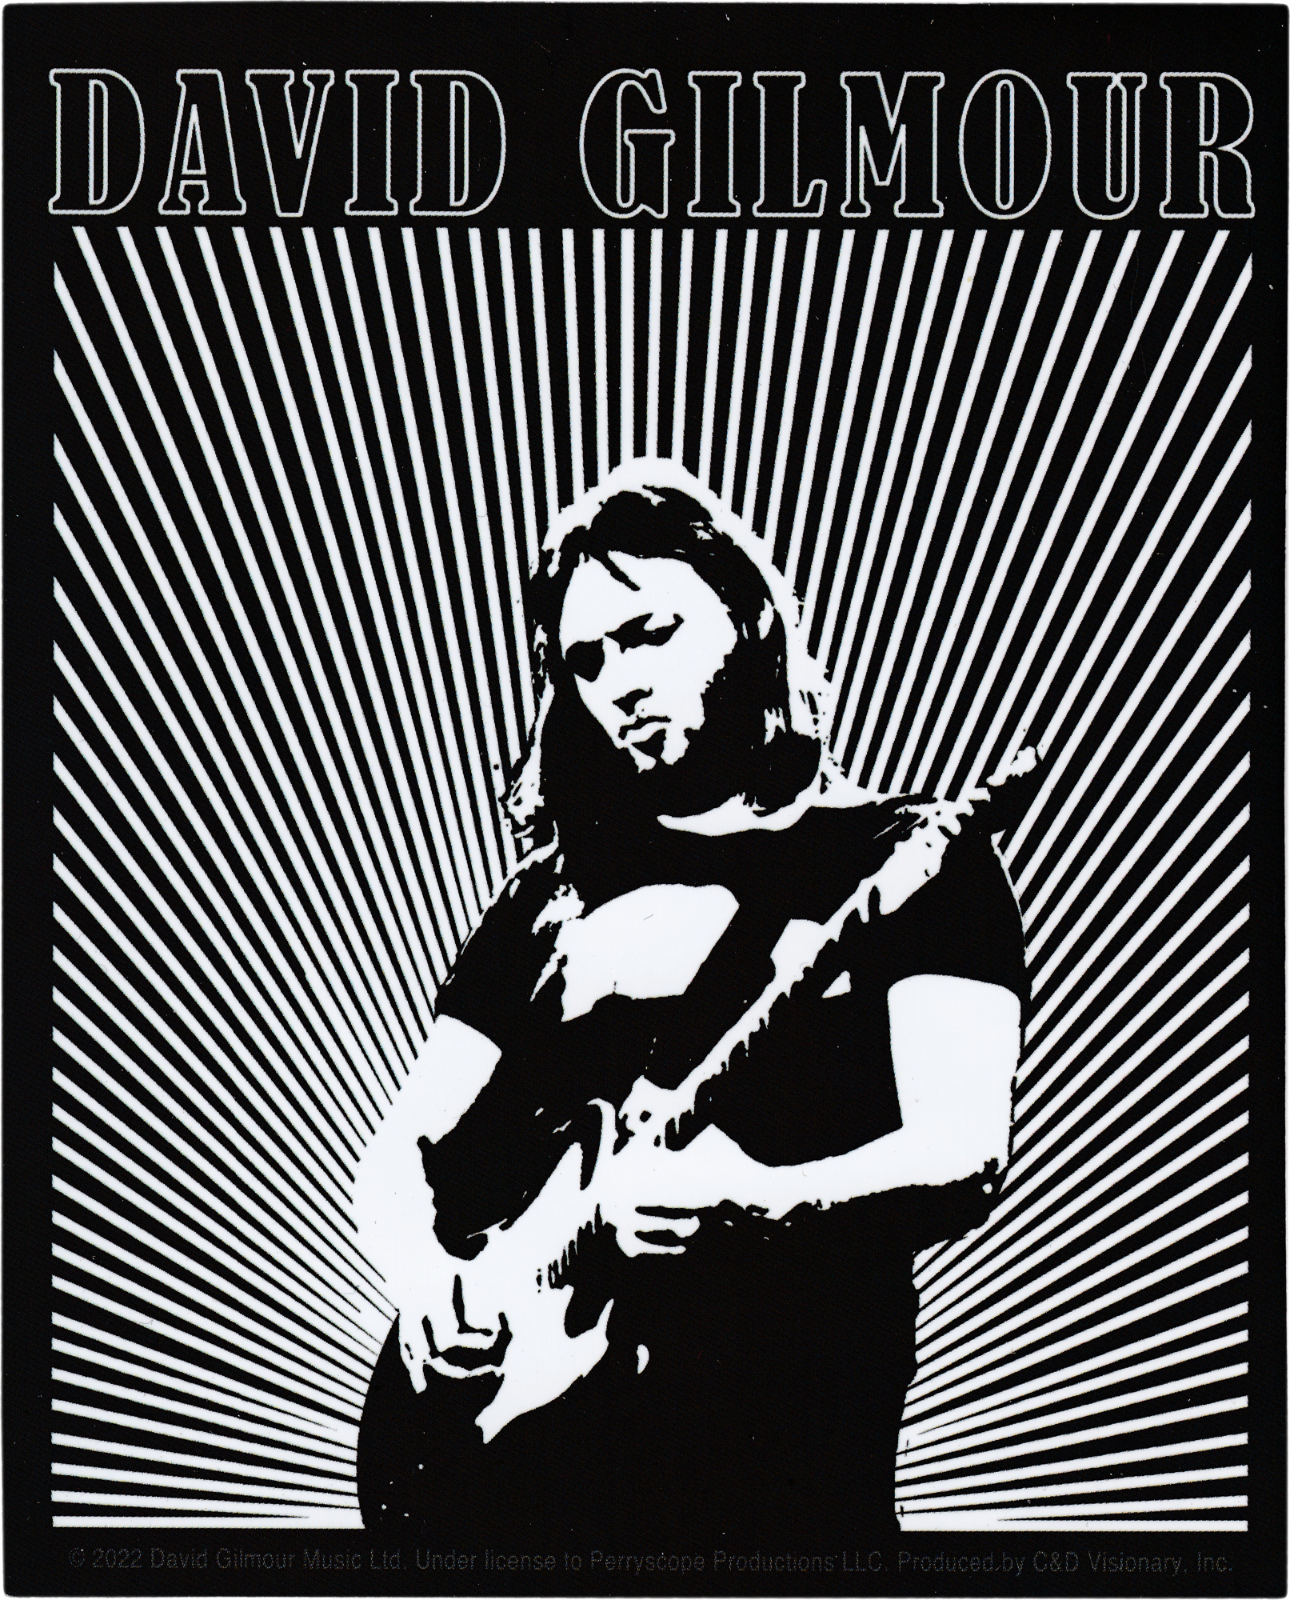 Sticker - David Gilmour Same day shipping Guitar Pink 60s 70s Rock Limited Special Price Floyd Ban Music